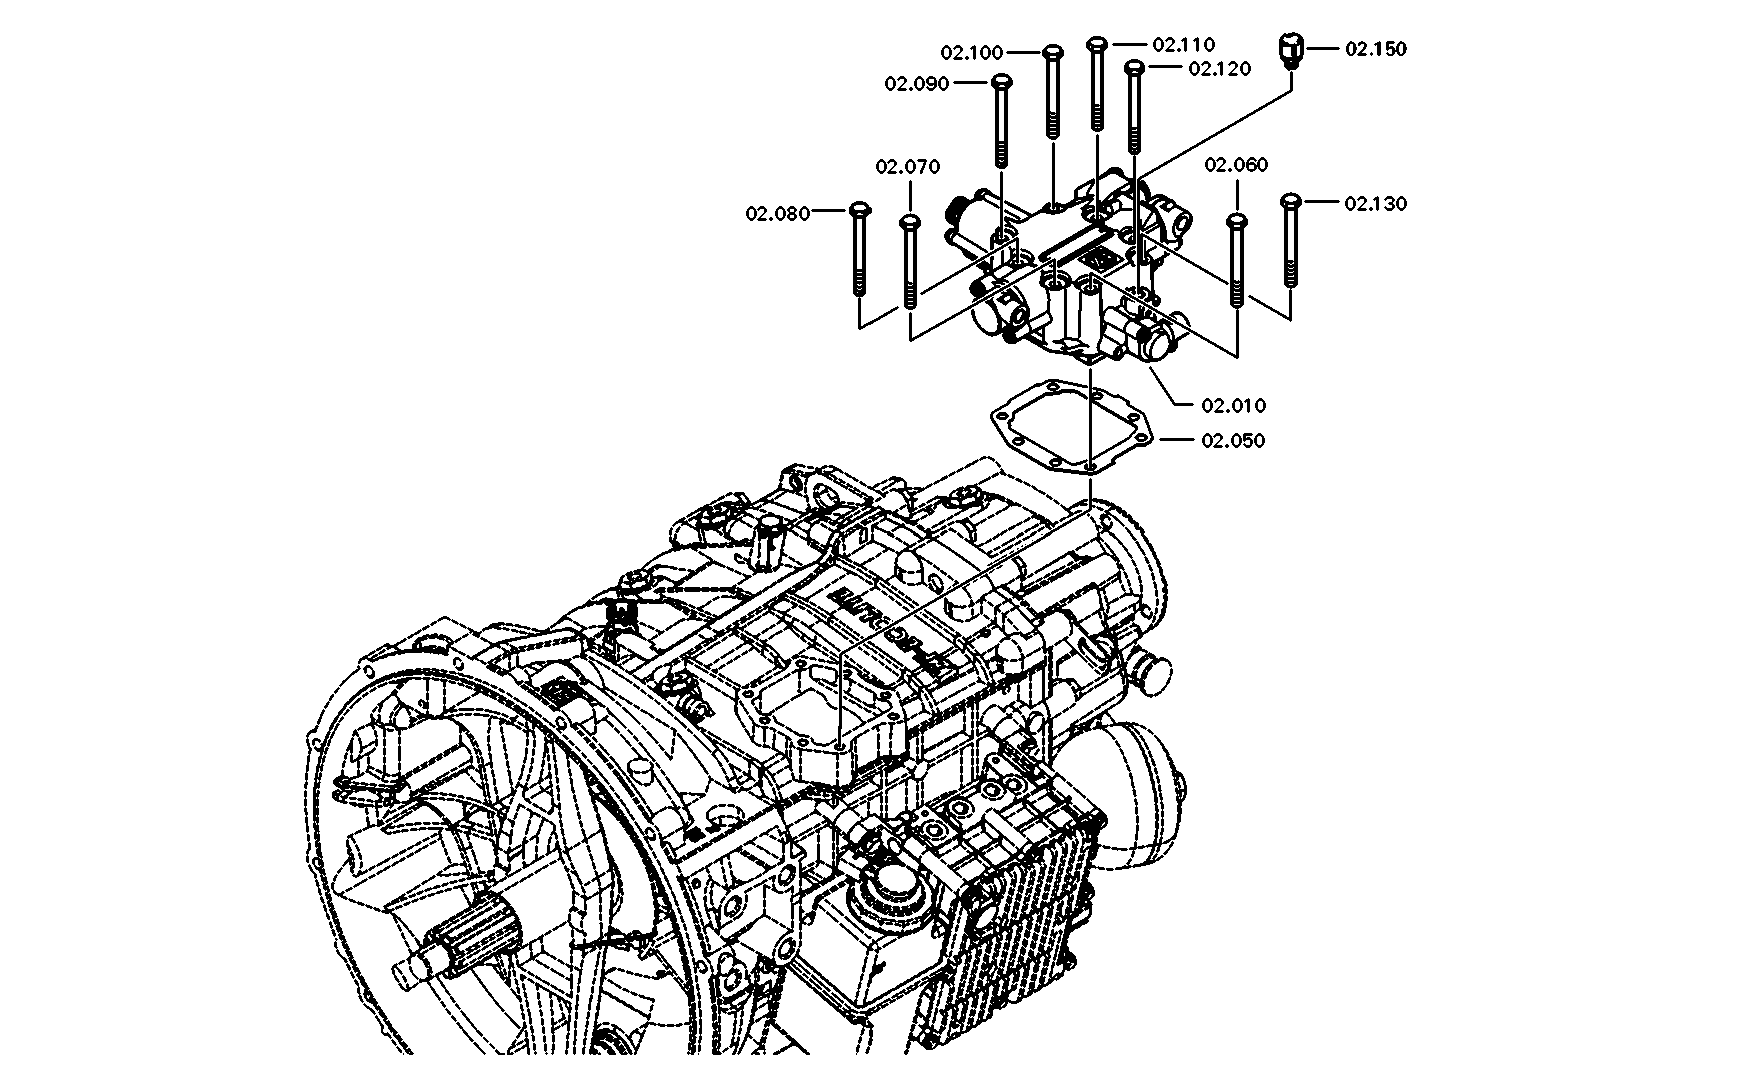 drawing for DAF 1780803 - TRANSMISSION ACTUATOR (figure 4)